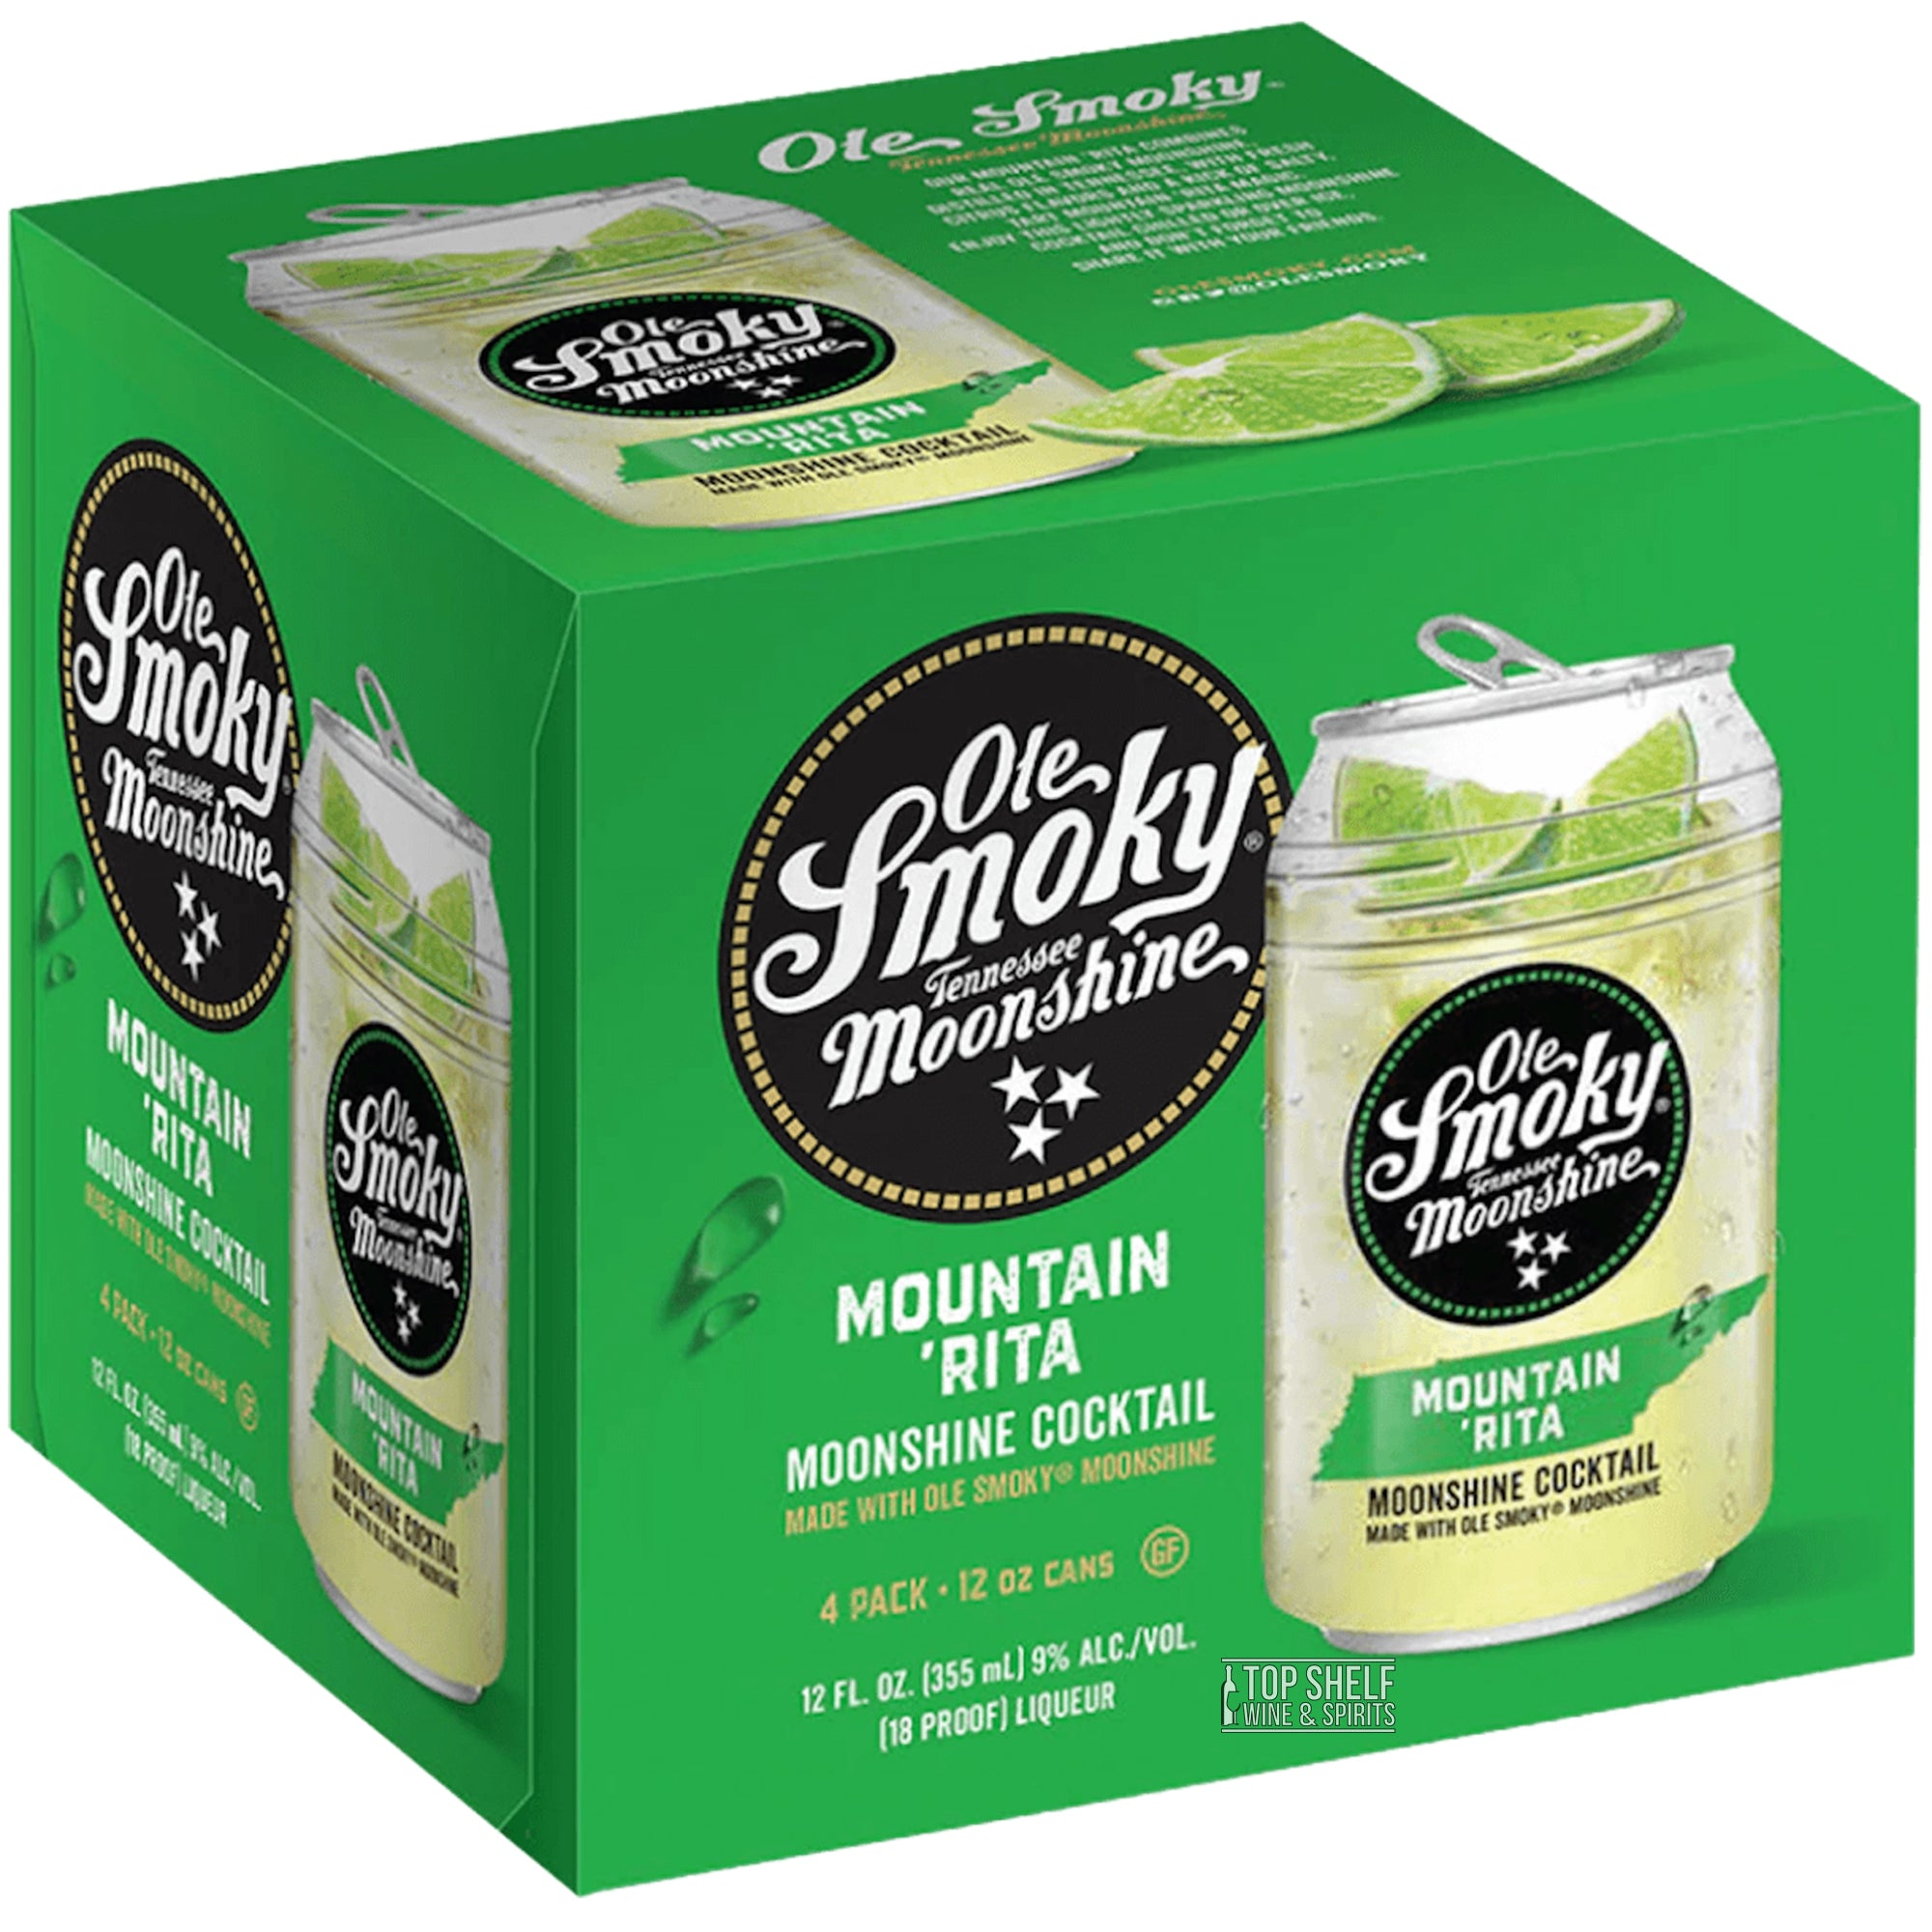 Ole Smoky Mountain Rita Moonshine Cocktail (4 pack cans)